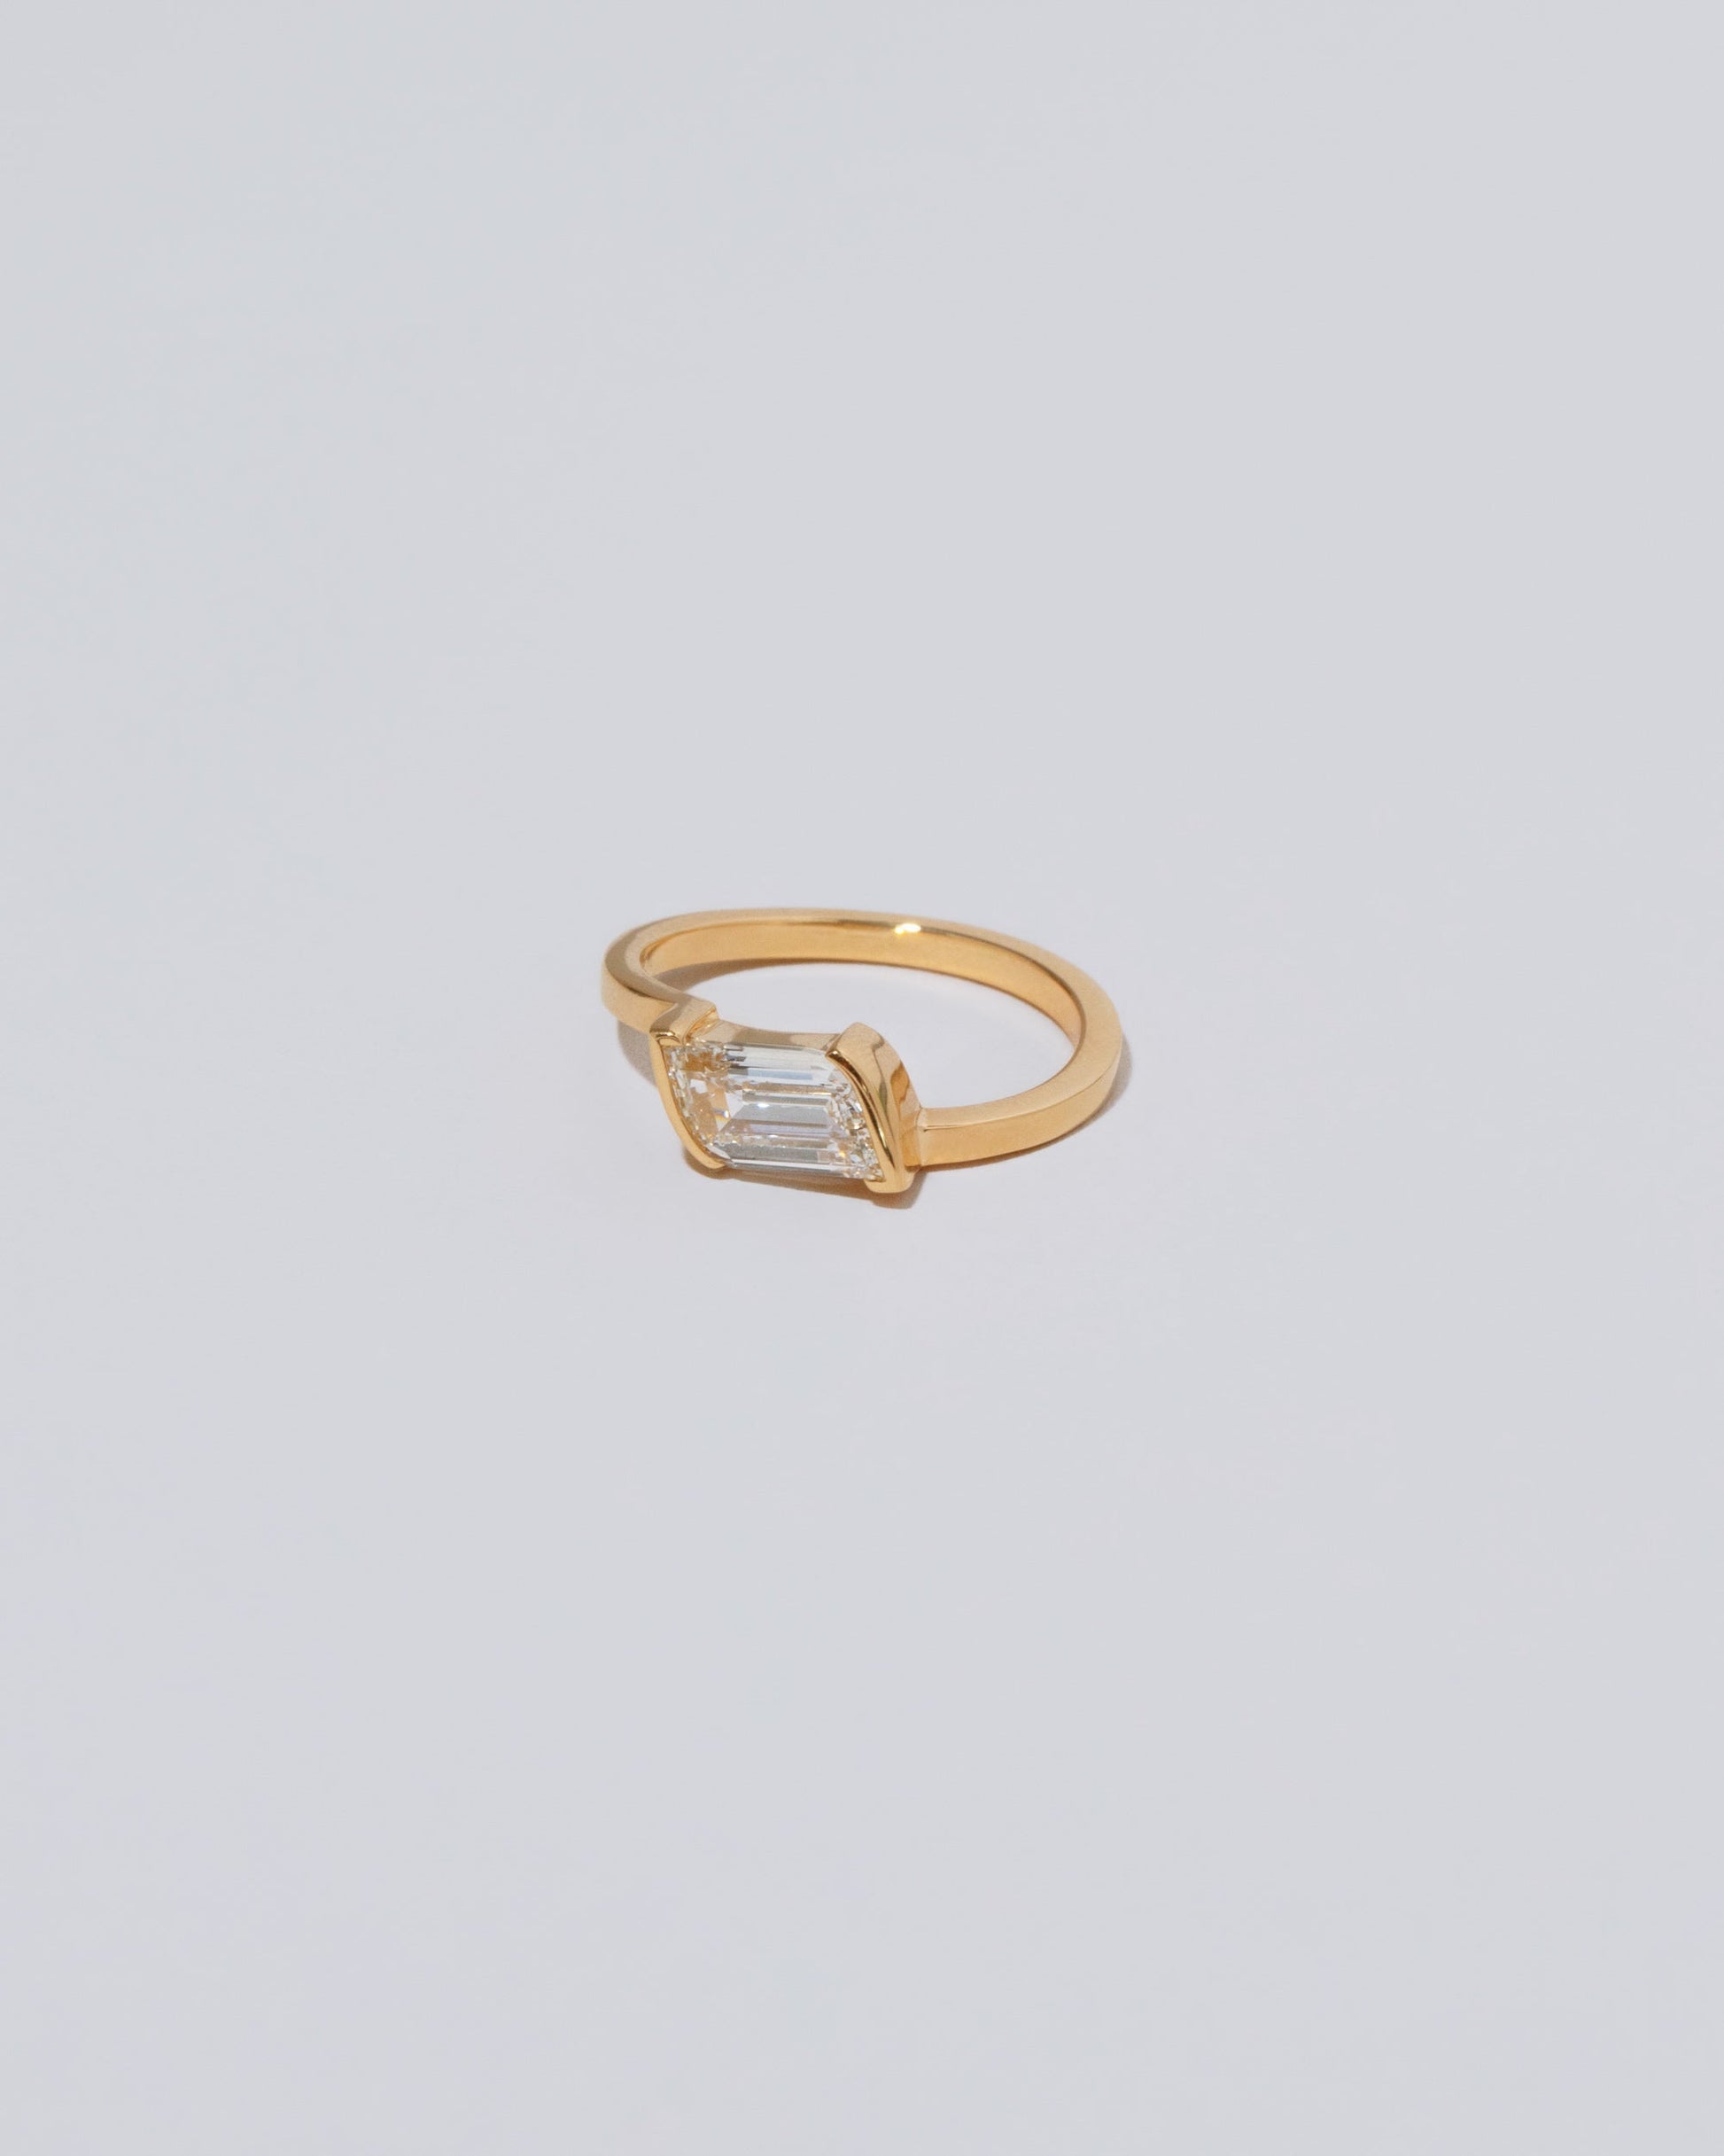 Product photo of the Chassé Ring on light color background